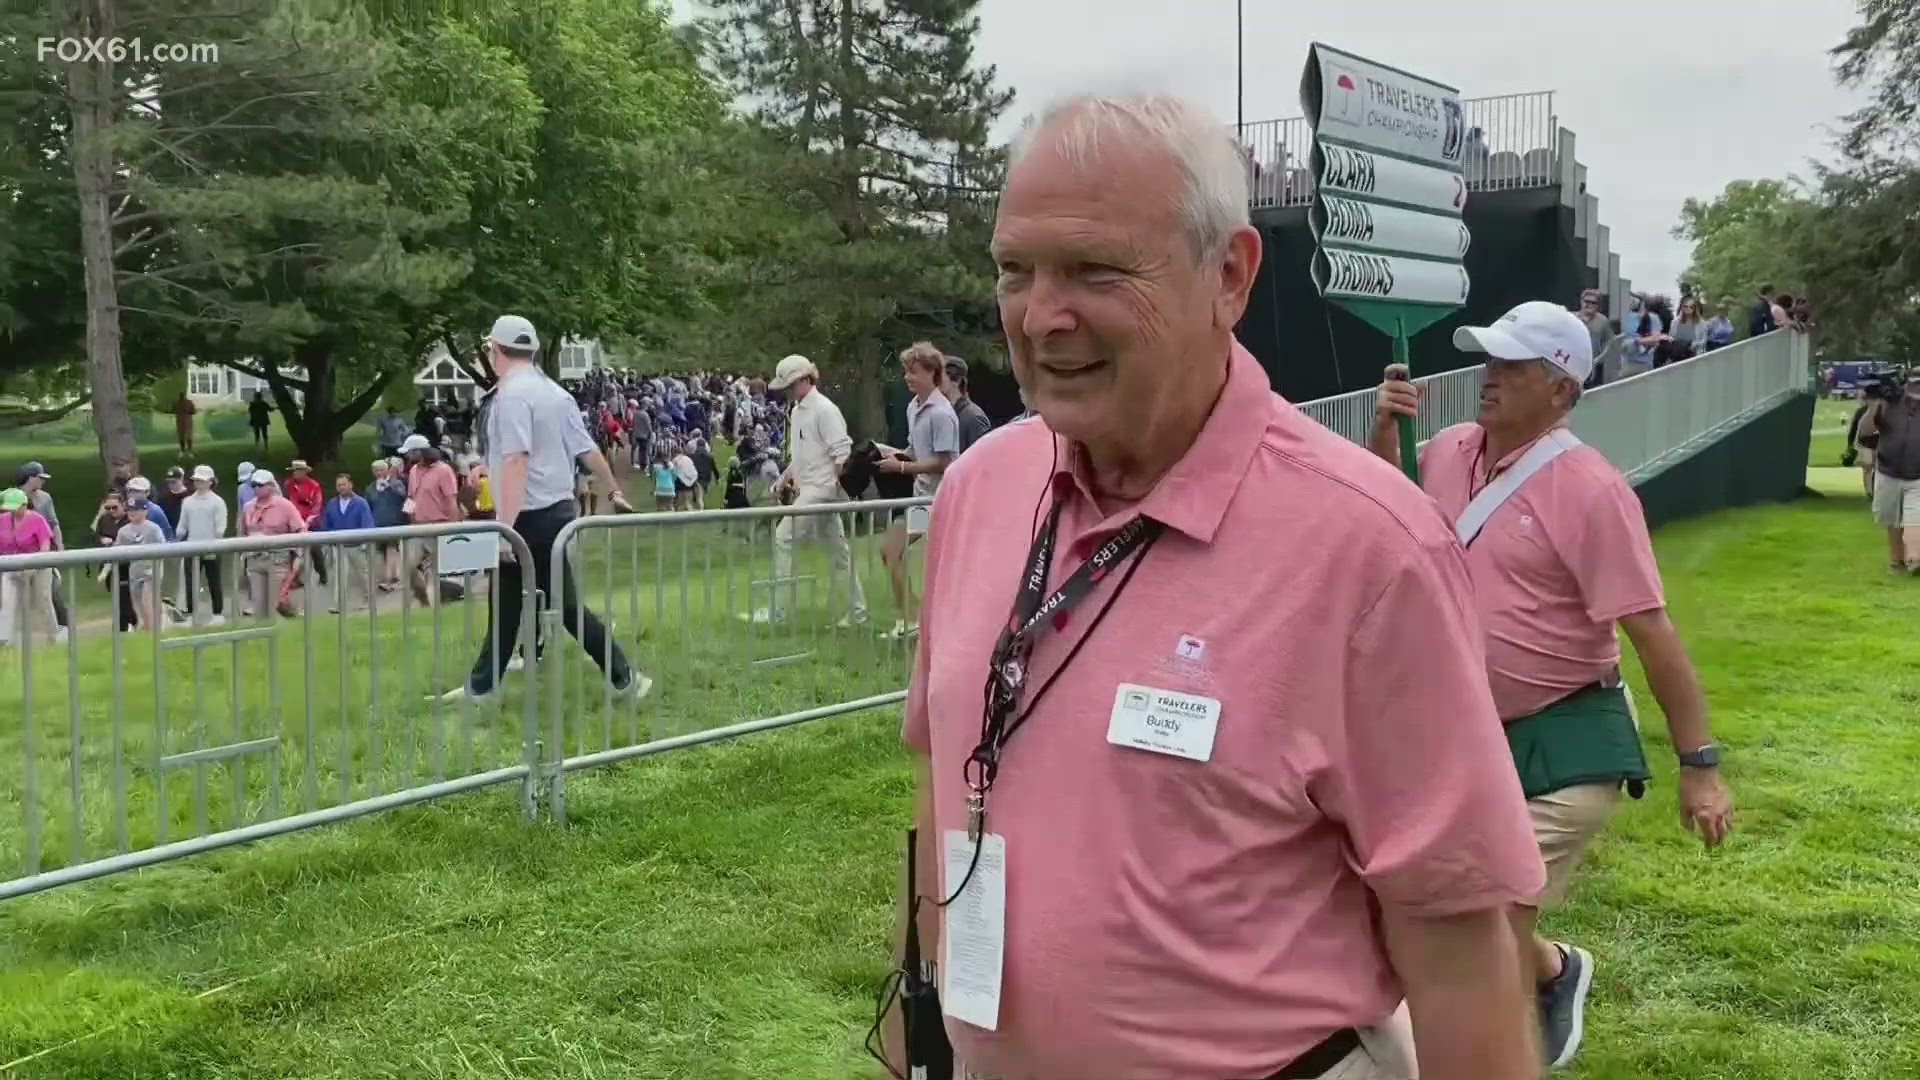 Charles "Buddy" Buder, a volunteer celebrating 50 years of service at the Travelers Championship was selected as the 2022 PGA TOUR Volunteer of the Year.